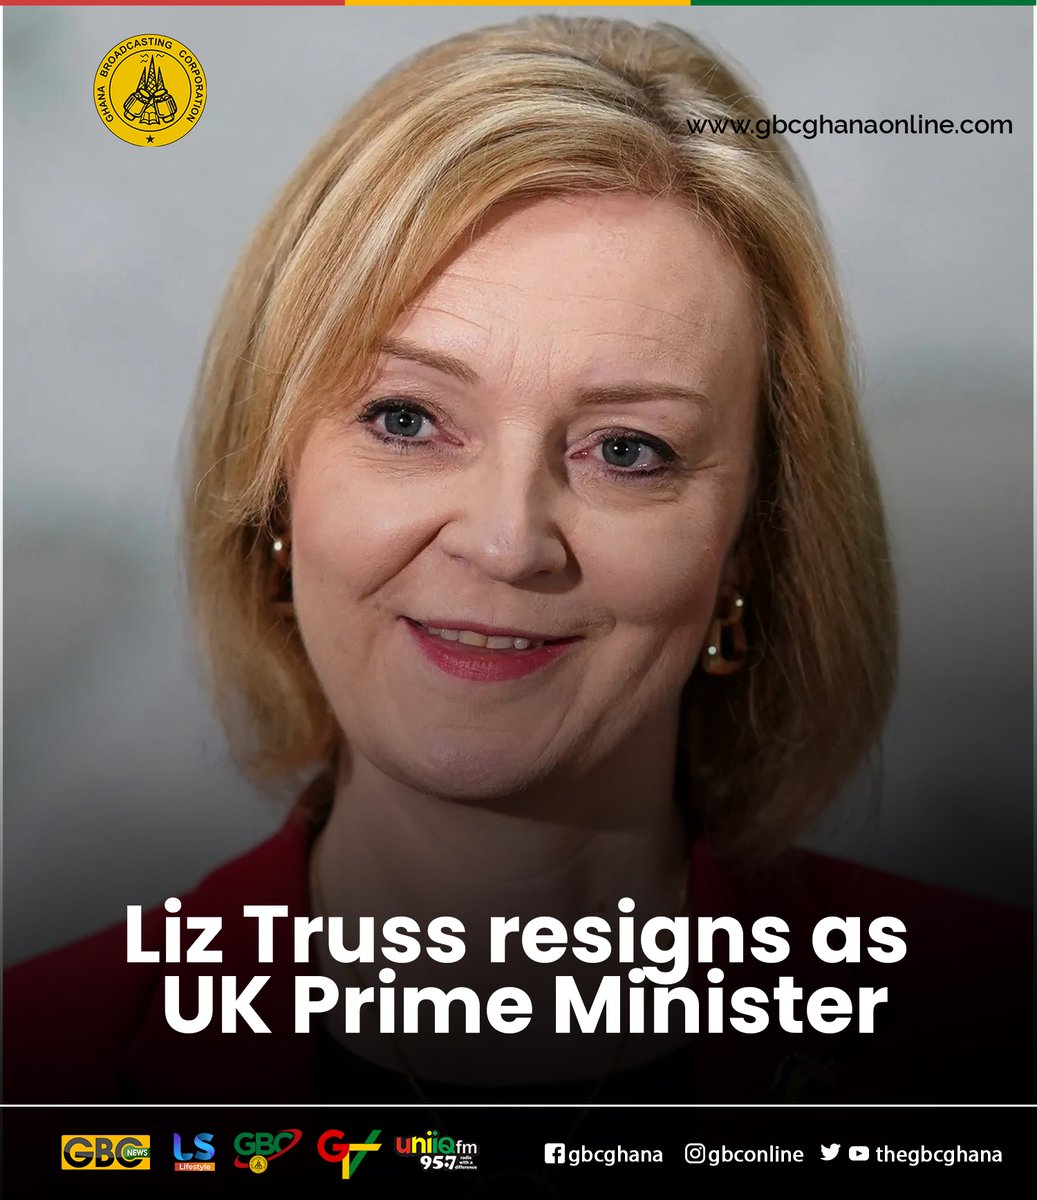 Liz Truss resigns as UK prime minister after 45 days in office.